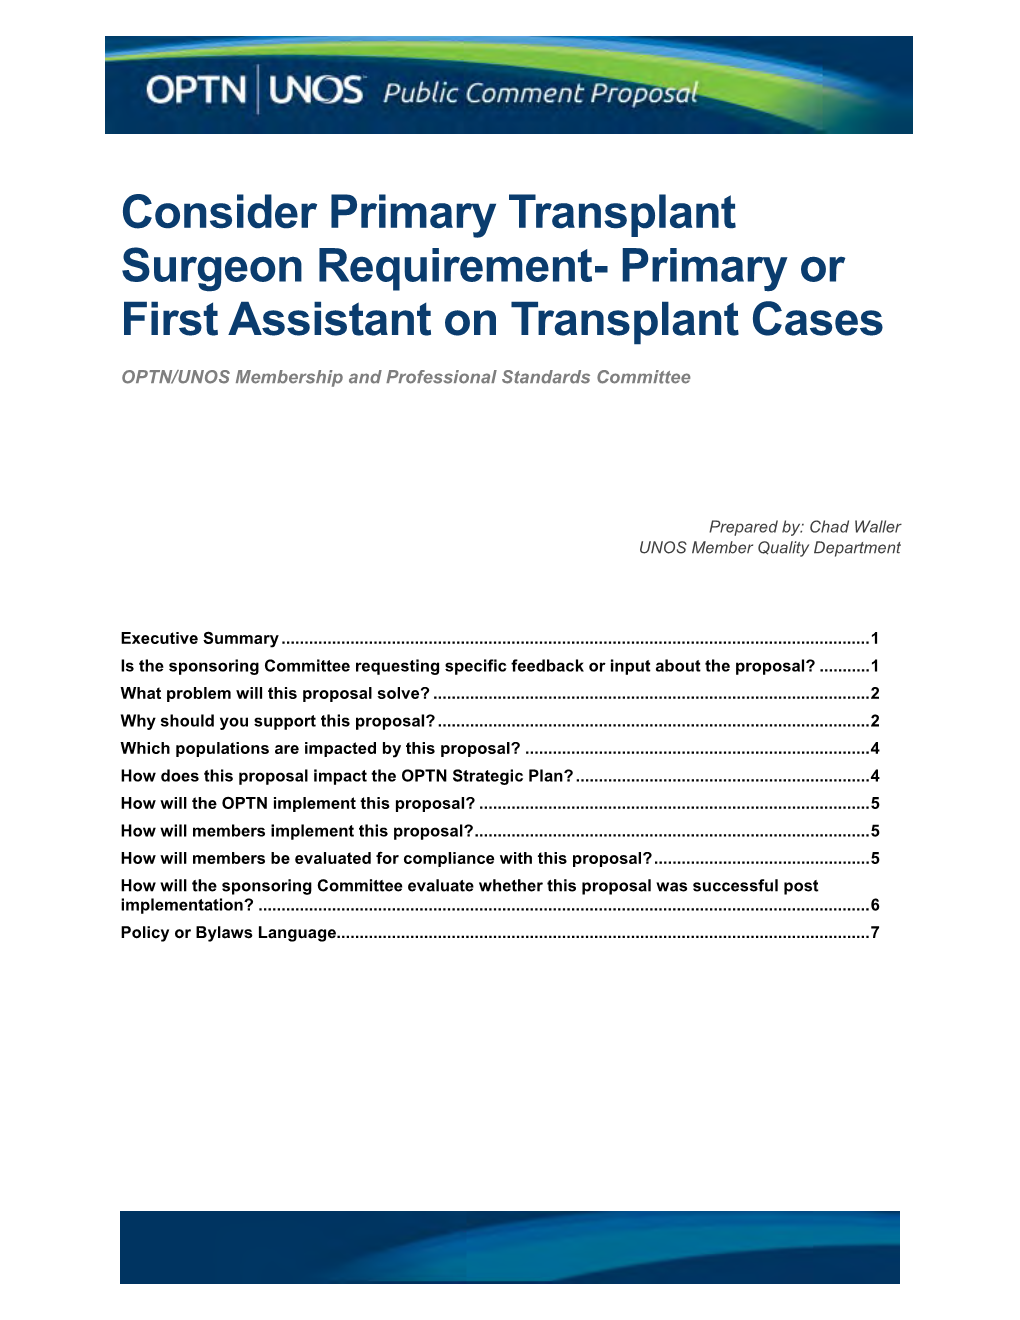 Consider Primary Transplant Surgeon Requirement- Primary Or First Assistant on Transplant Cases